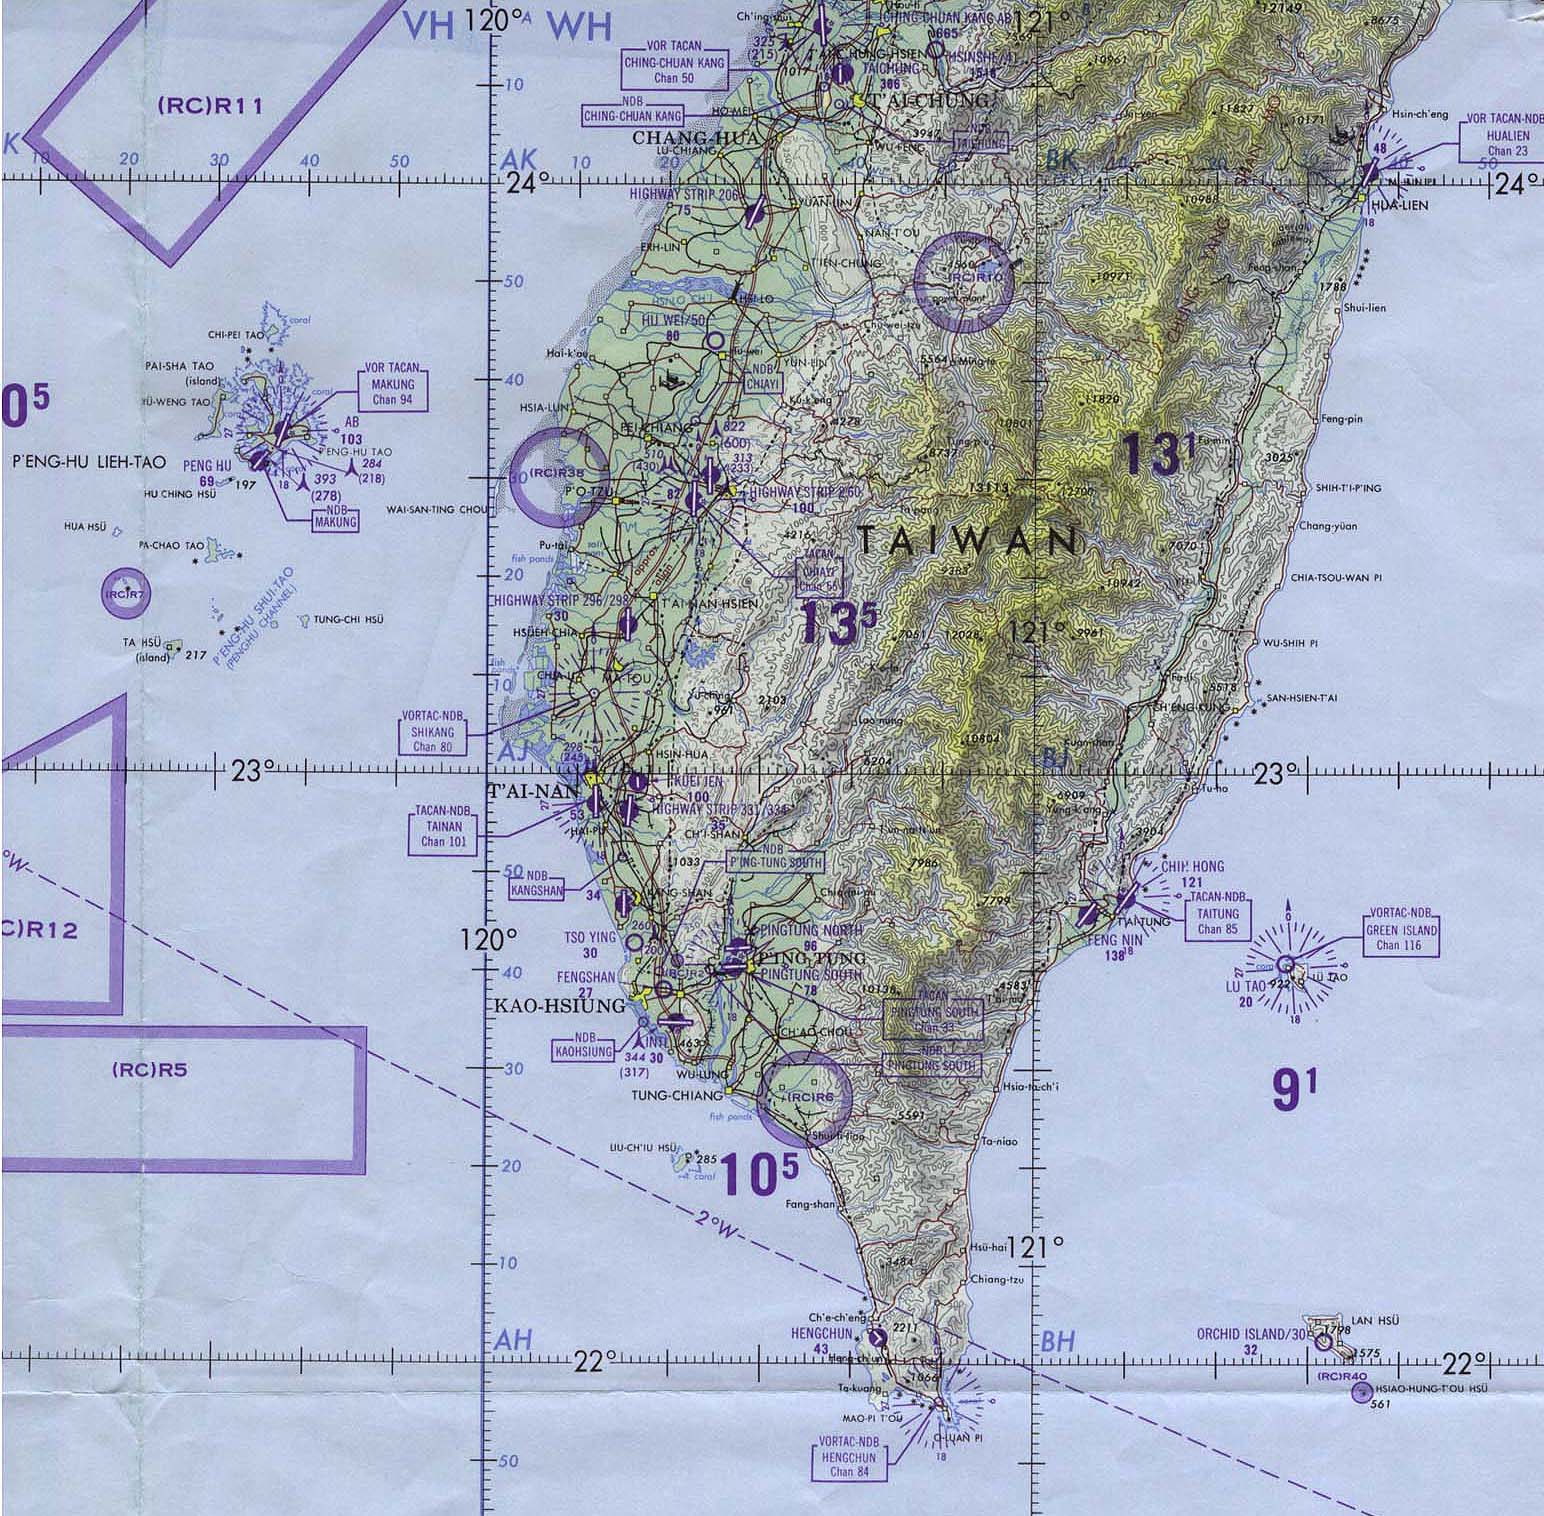 Map Of China , Taiwan - Southern Original scale 1:1,000,000. Portion of Operational Navigation Chart sheet ONC J-12, U.S. Defense Mapping Agency 1984 (400K) Not for navigational use 